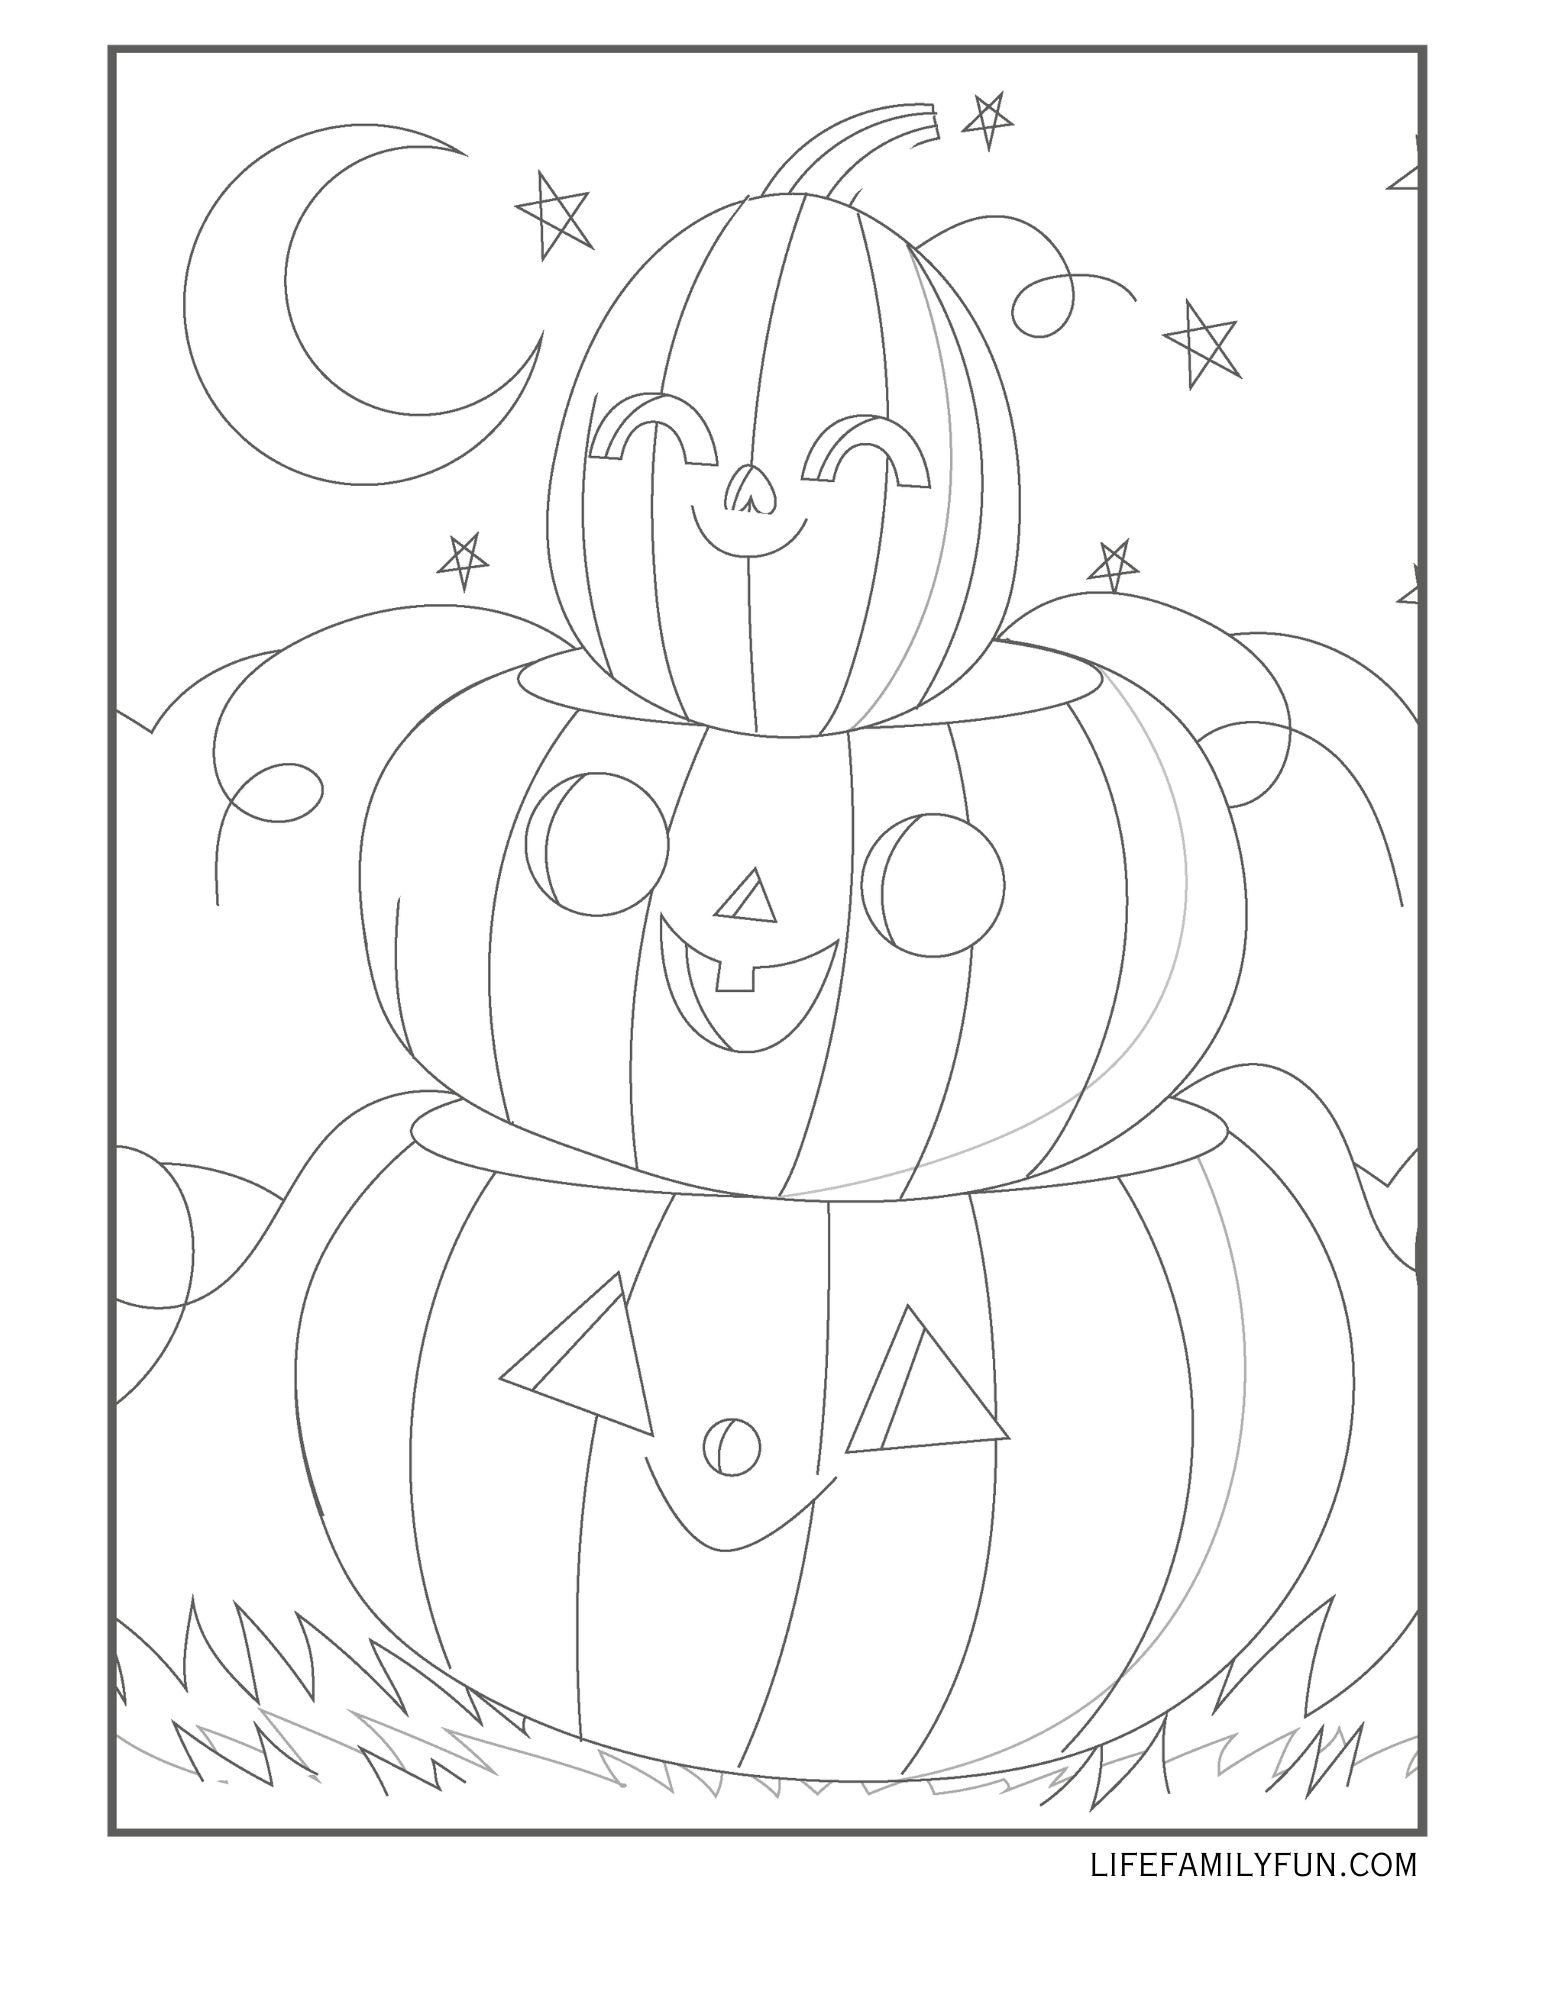 Stacked Halloween Pumpkins Coloring Page